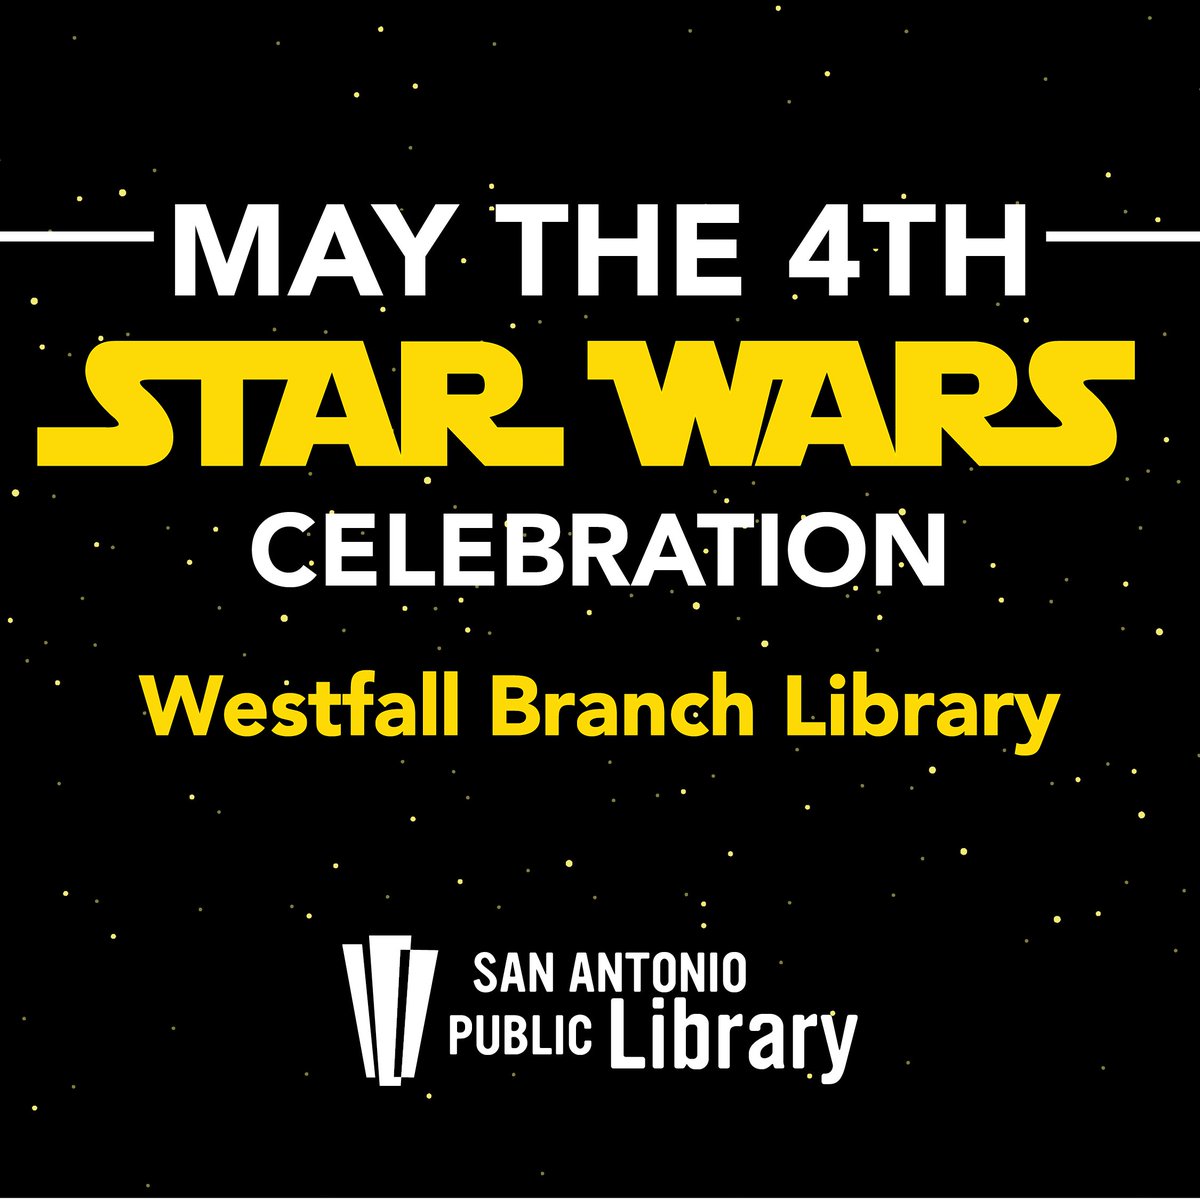 Join us on May 4 from 2-5:30 p.m. at Westfall for a Star Wars celebration marking the 25th anniversary of “The Phantom Menace”! Wear a costume or join our trivia to win prizes. Plus, enjoy light refreshments while watching a screening of the movie at 3:30 p.m. 🌟🚀🎉